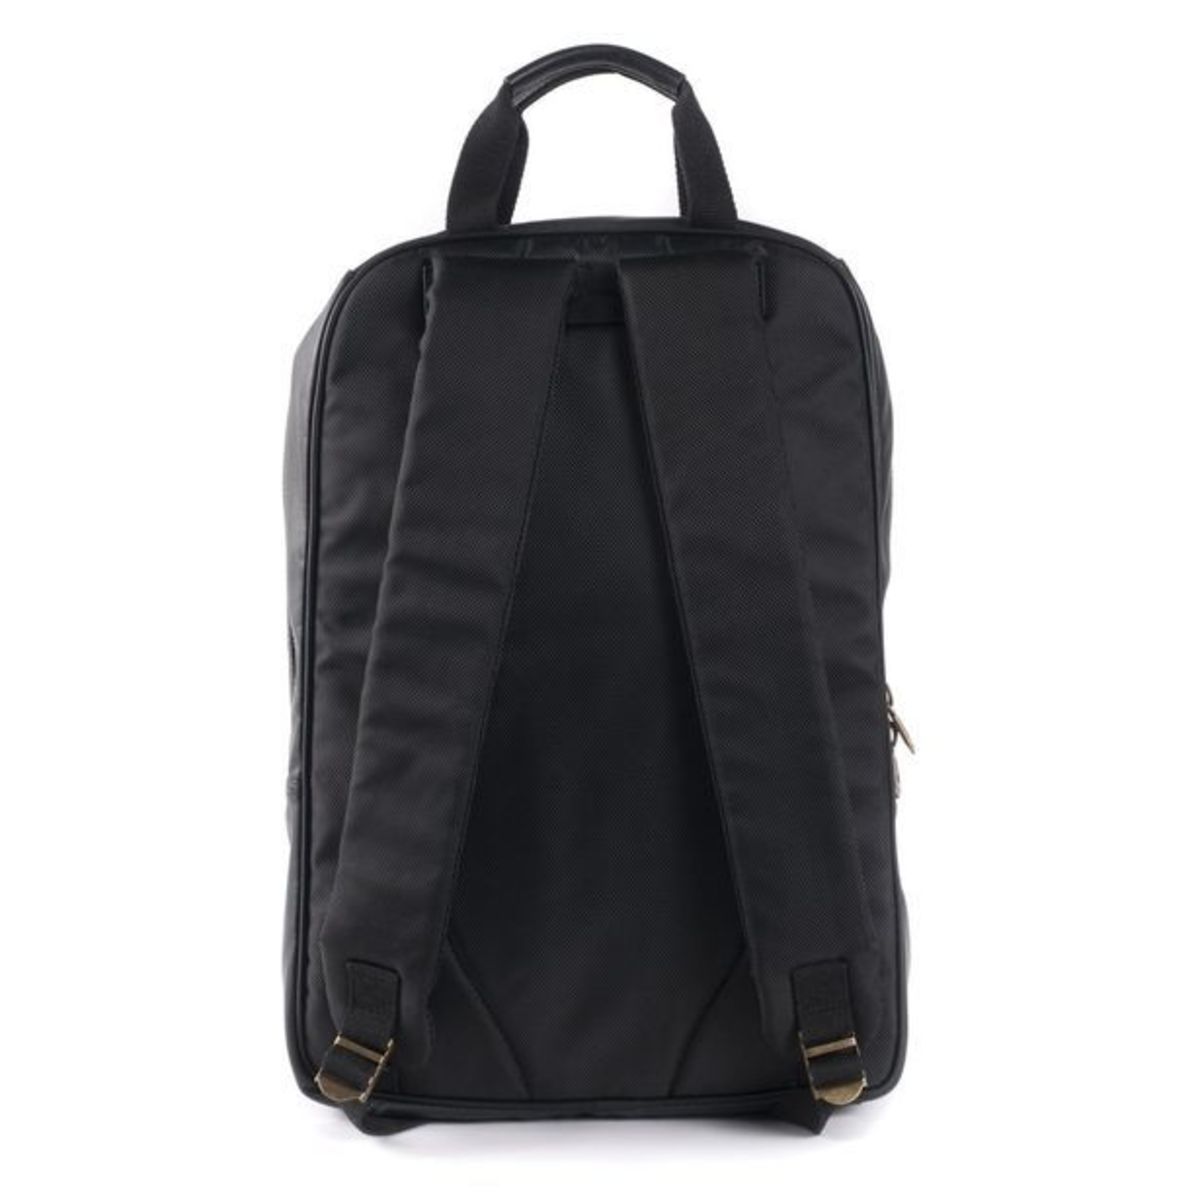 EDM Style: Mojo Backpacks' Bowery And 1113 Styles Are Perfect For Movement In EDM Culture